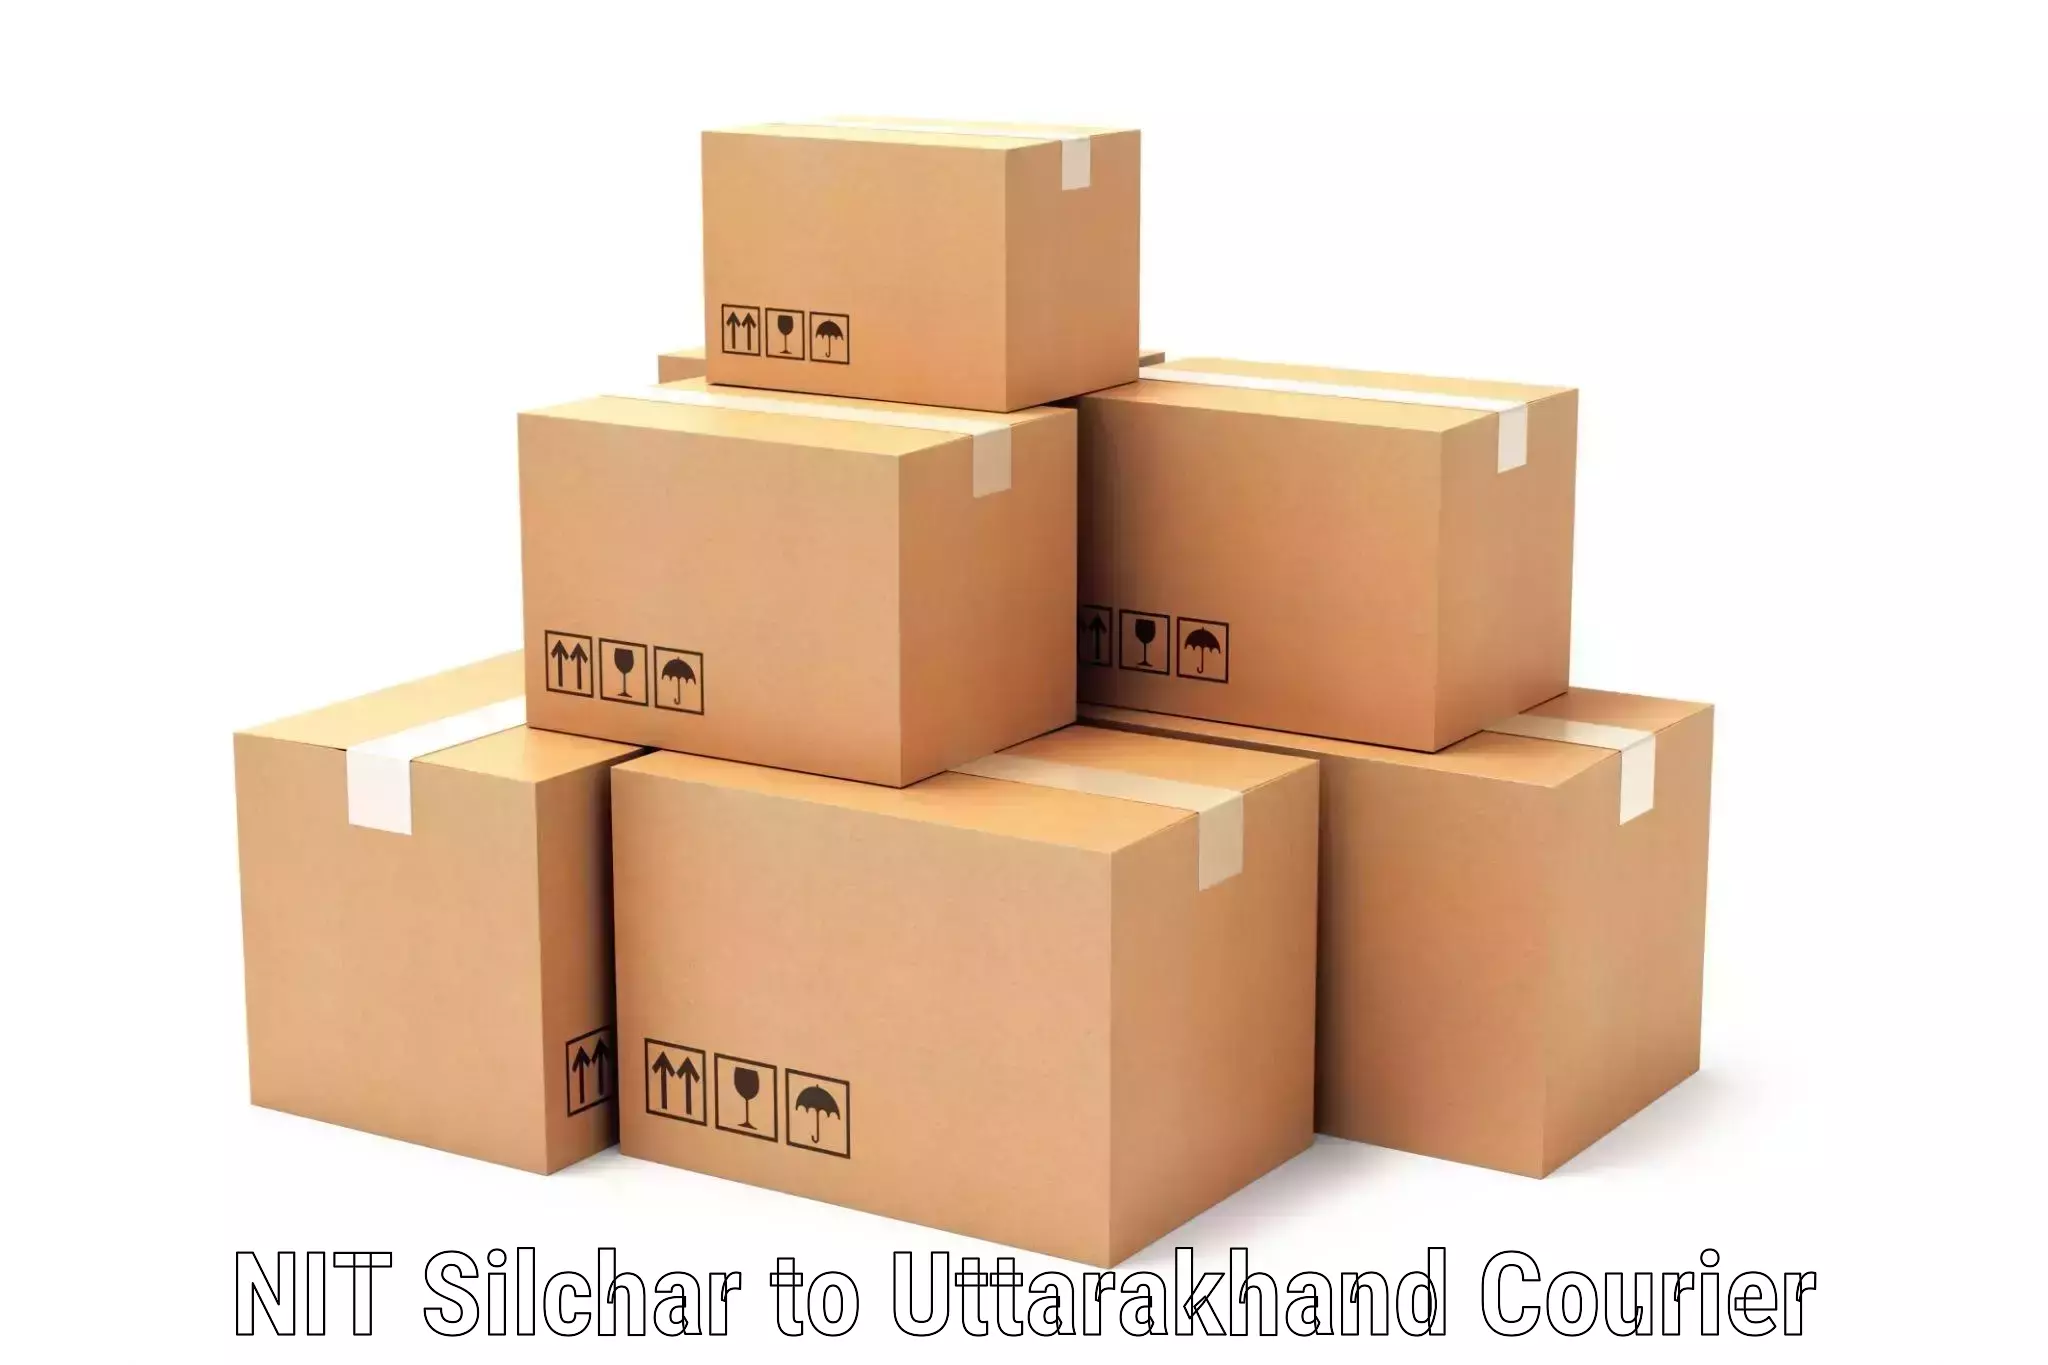 Seamless shipping experience in NIT Silchar to Mussoorie